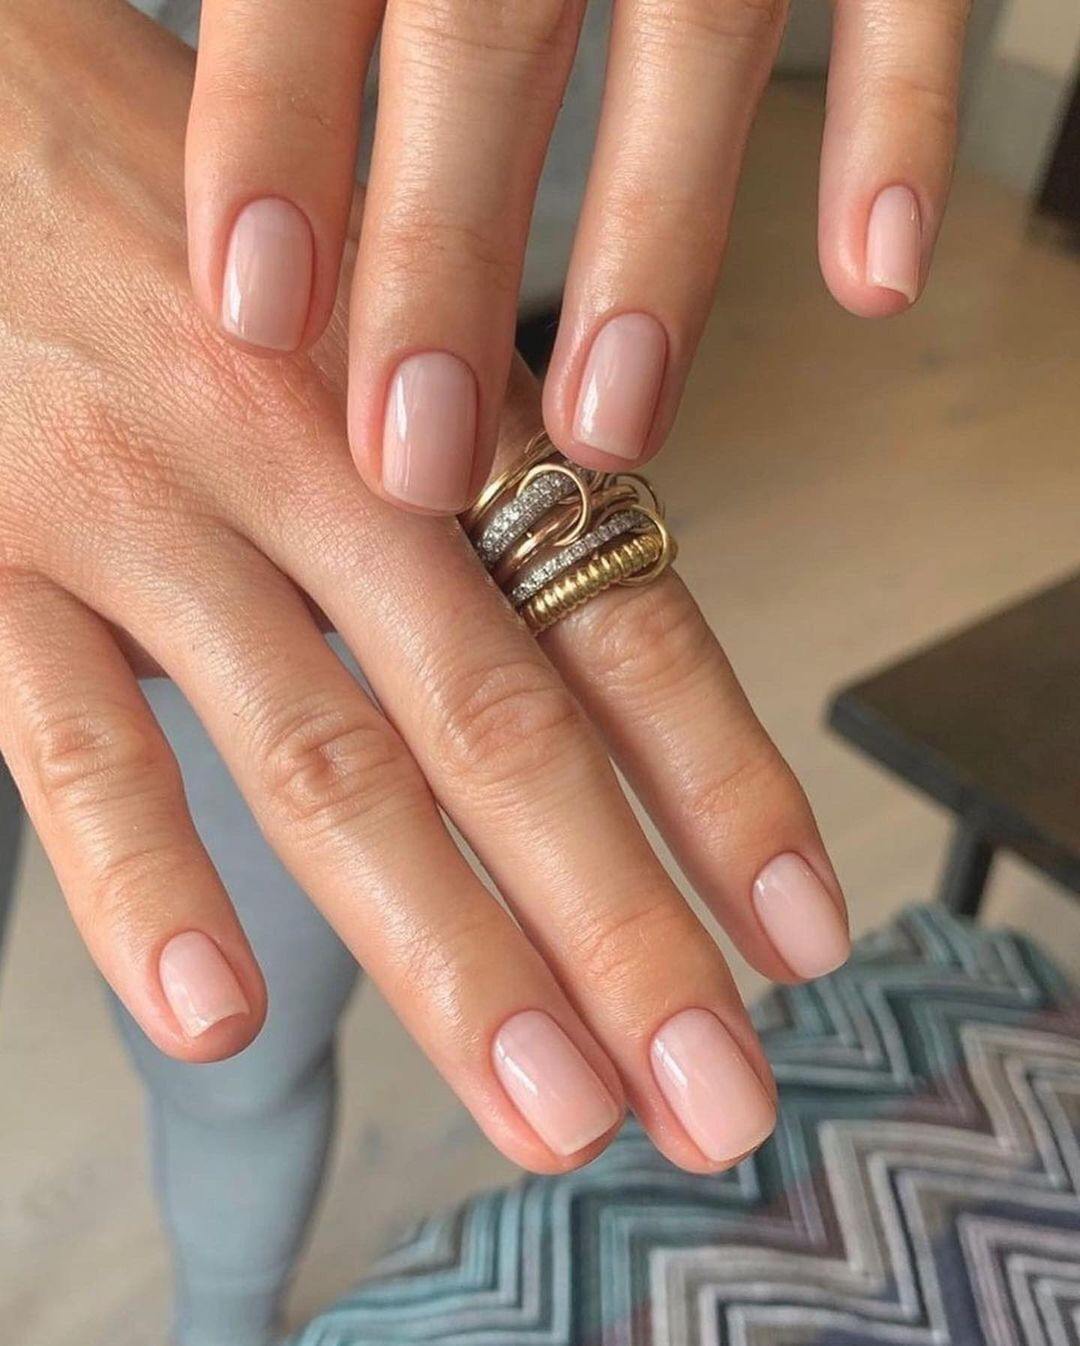 35 Nail Designs For 2022 You’ll Want To Try Immediately images 25